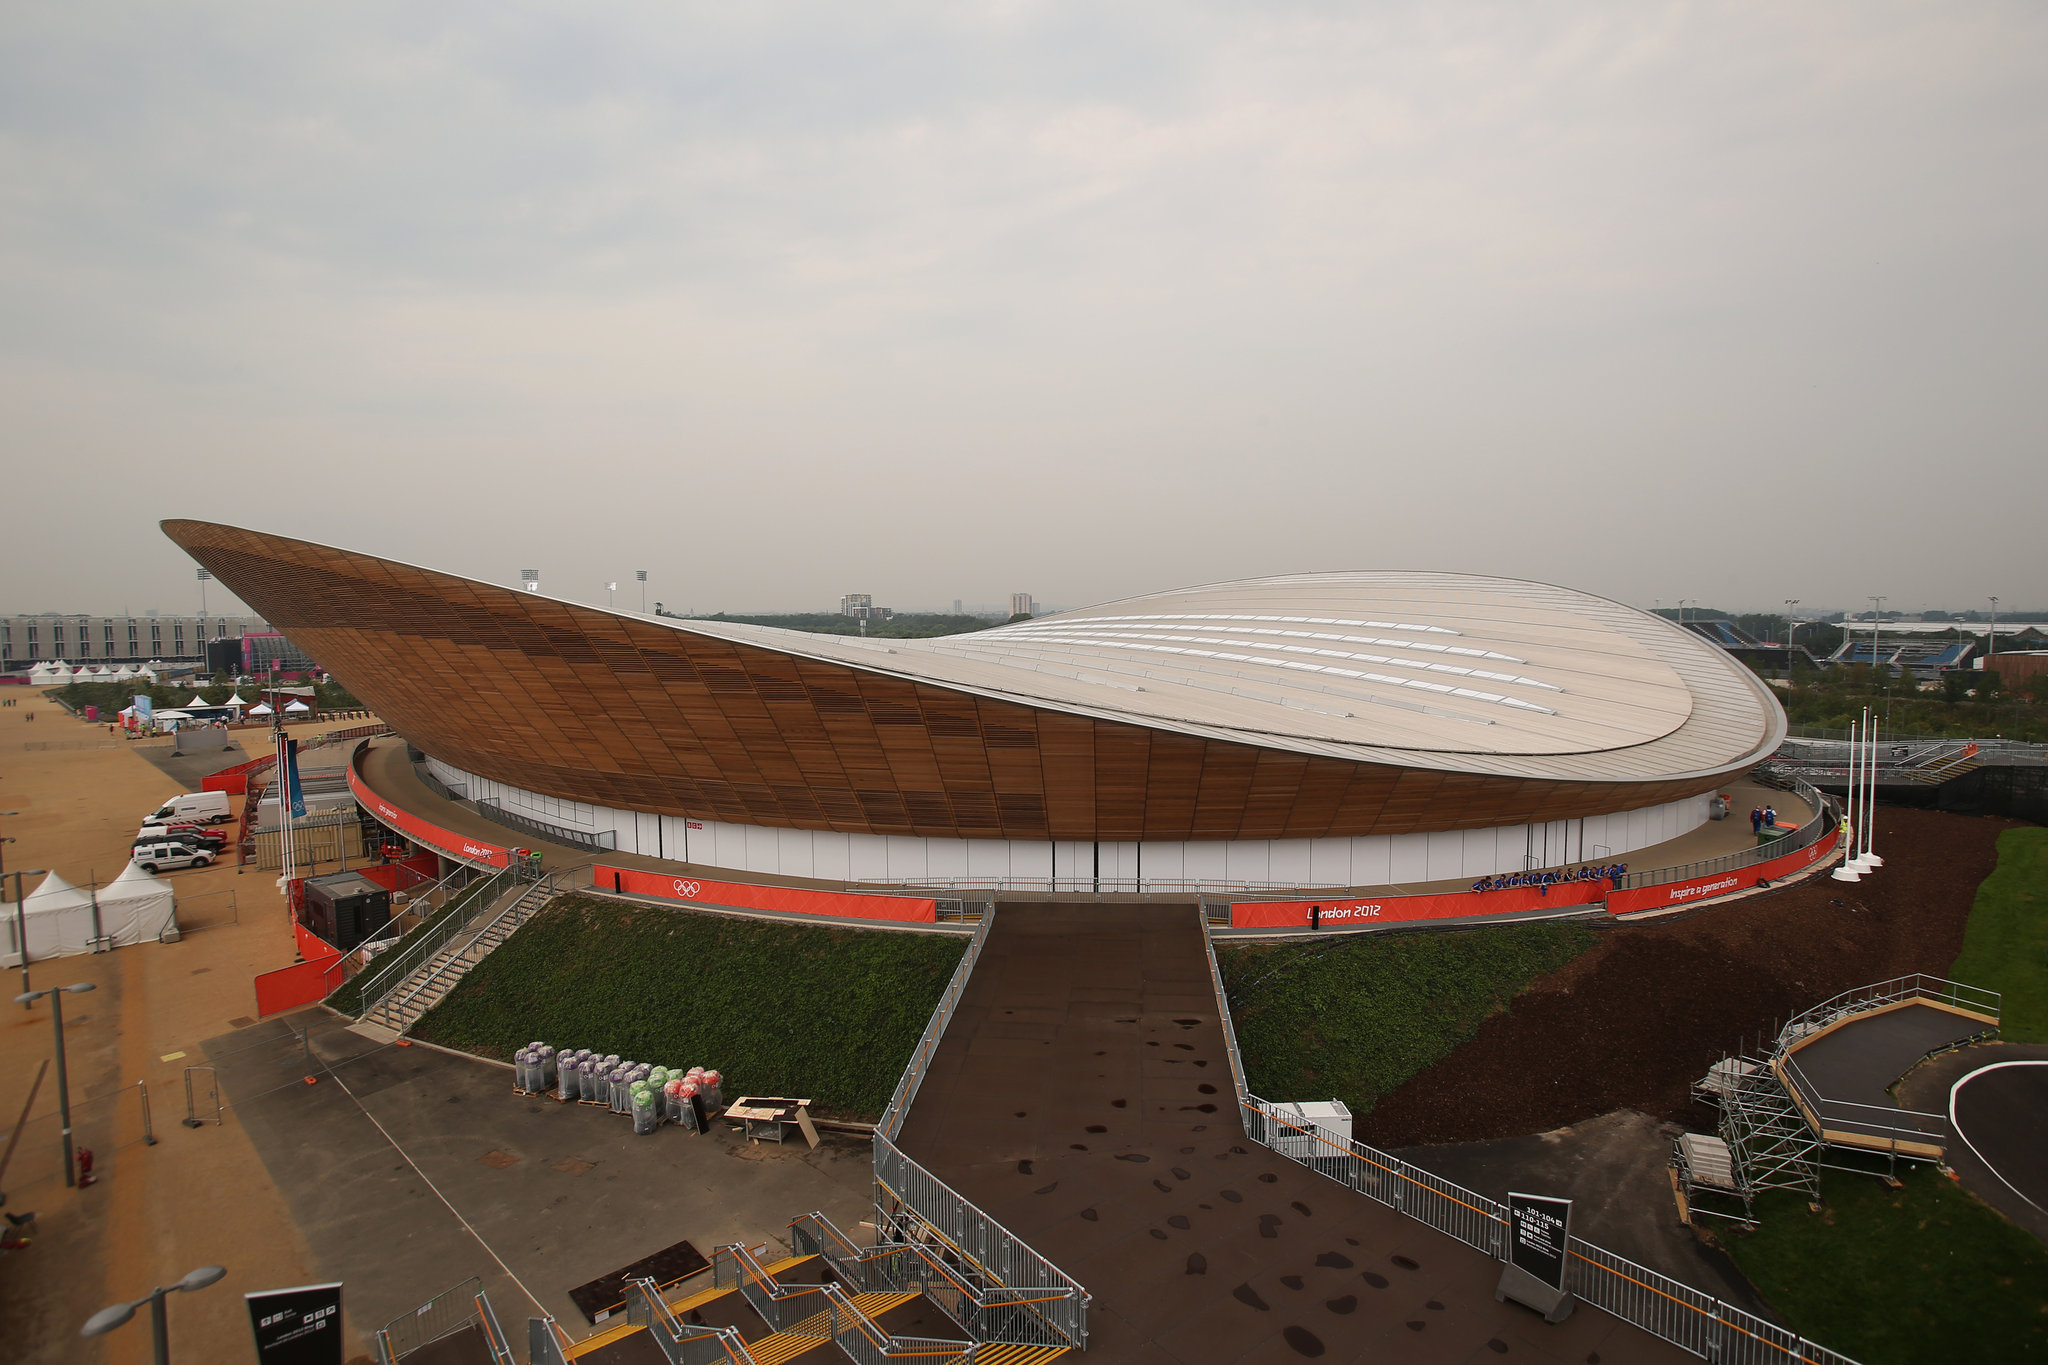 The Velodrome built for the 2012 Olympics in London was affectionately nicknamed 